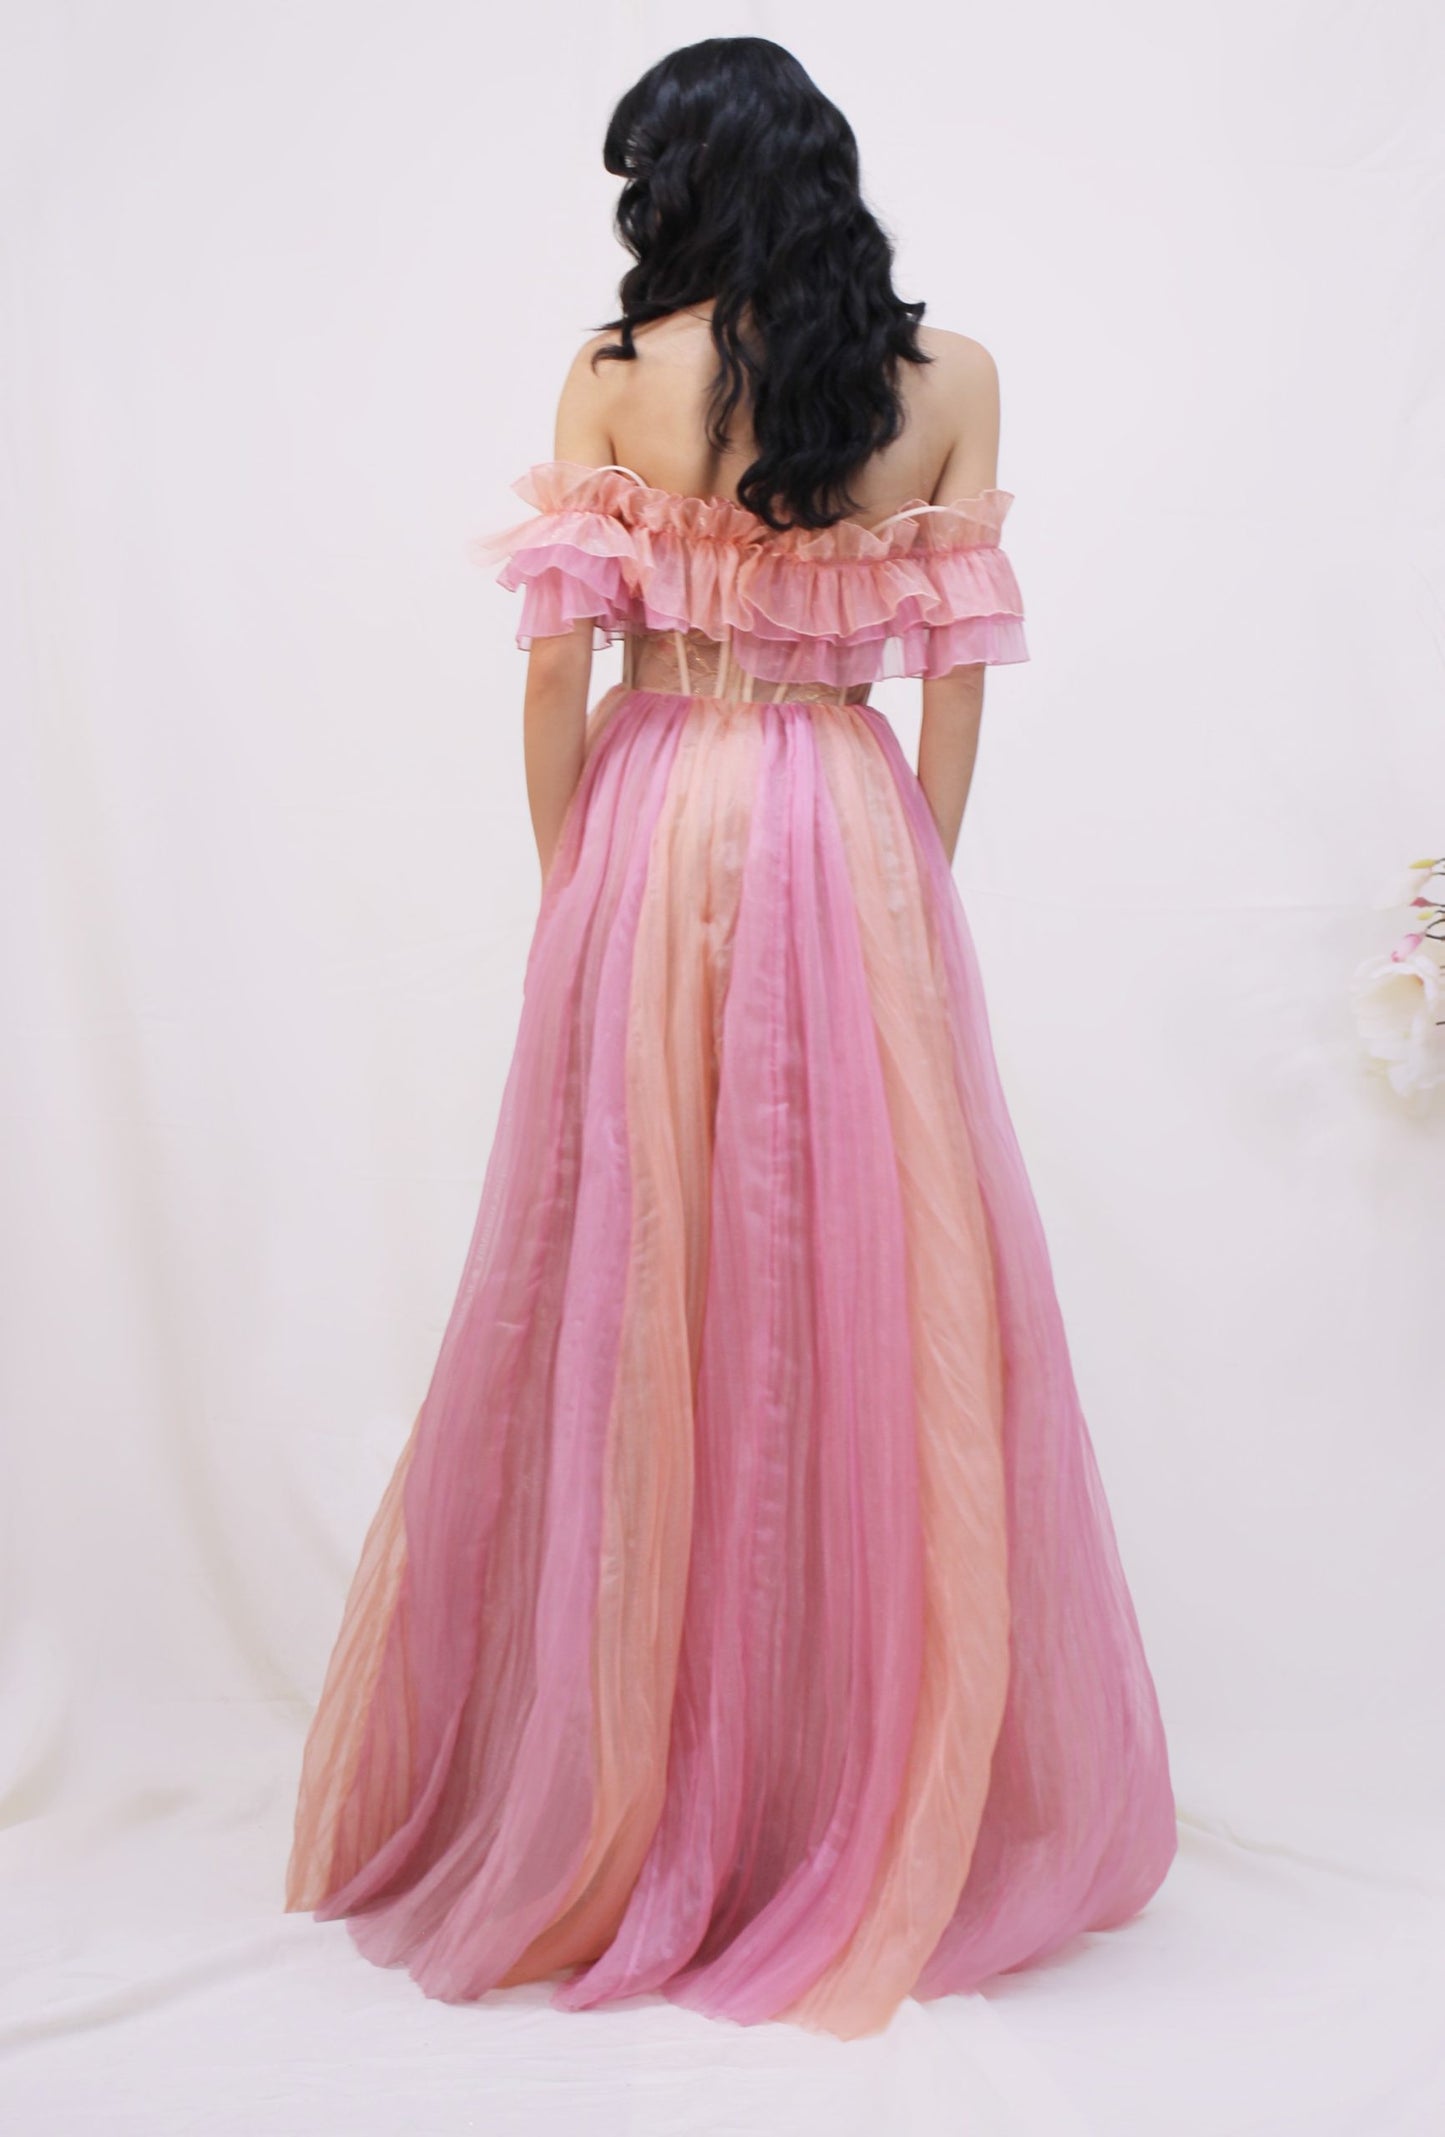 Two Toned Pink Evening Dress